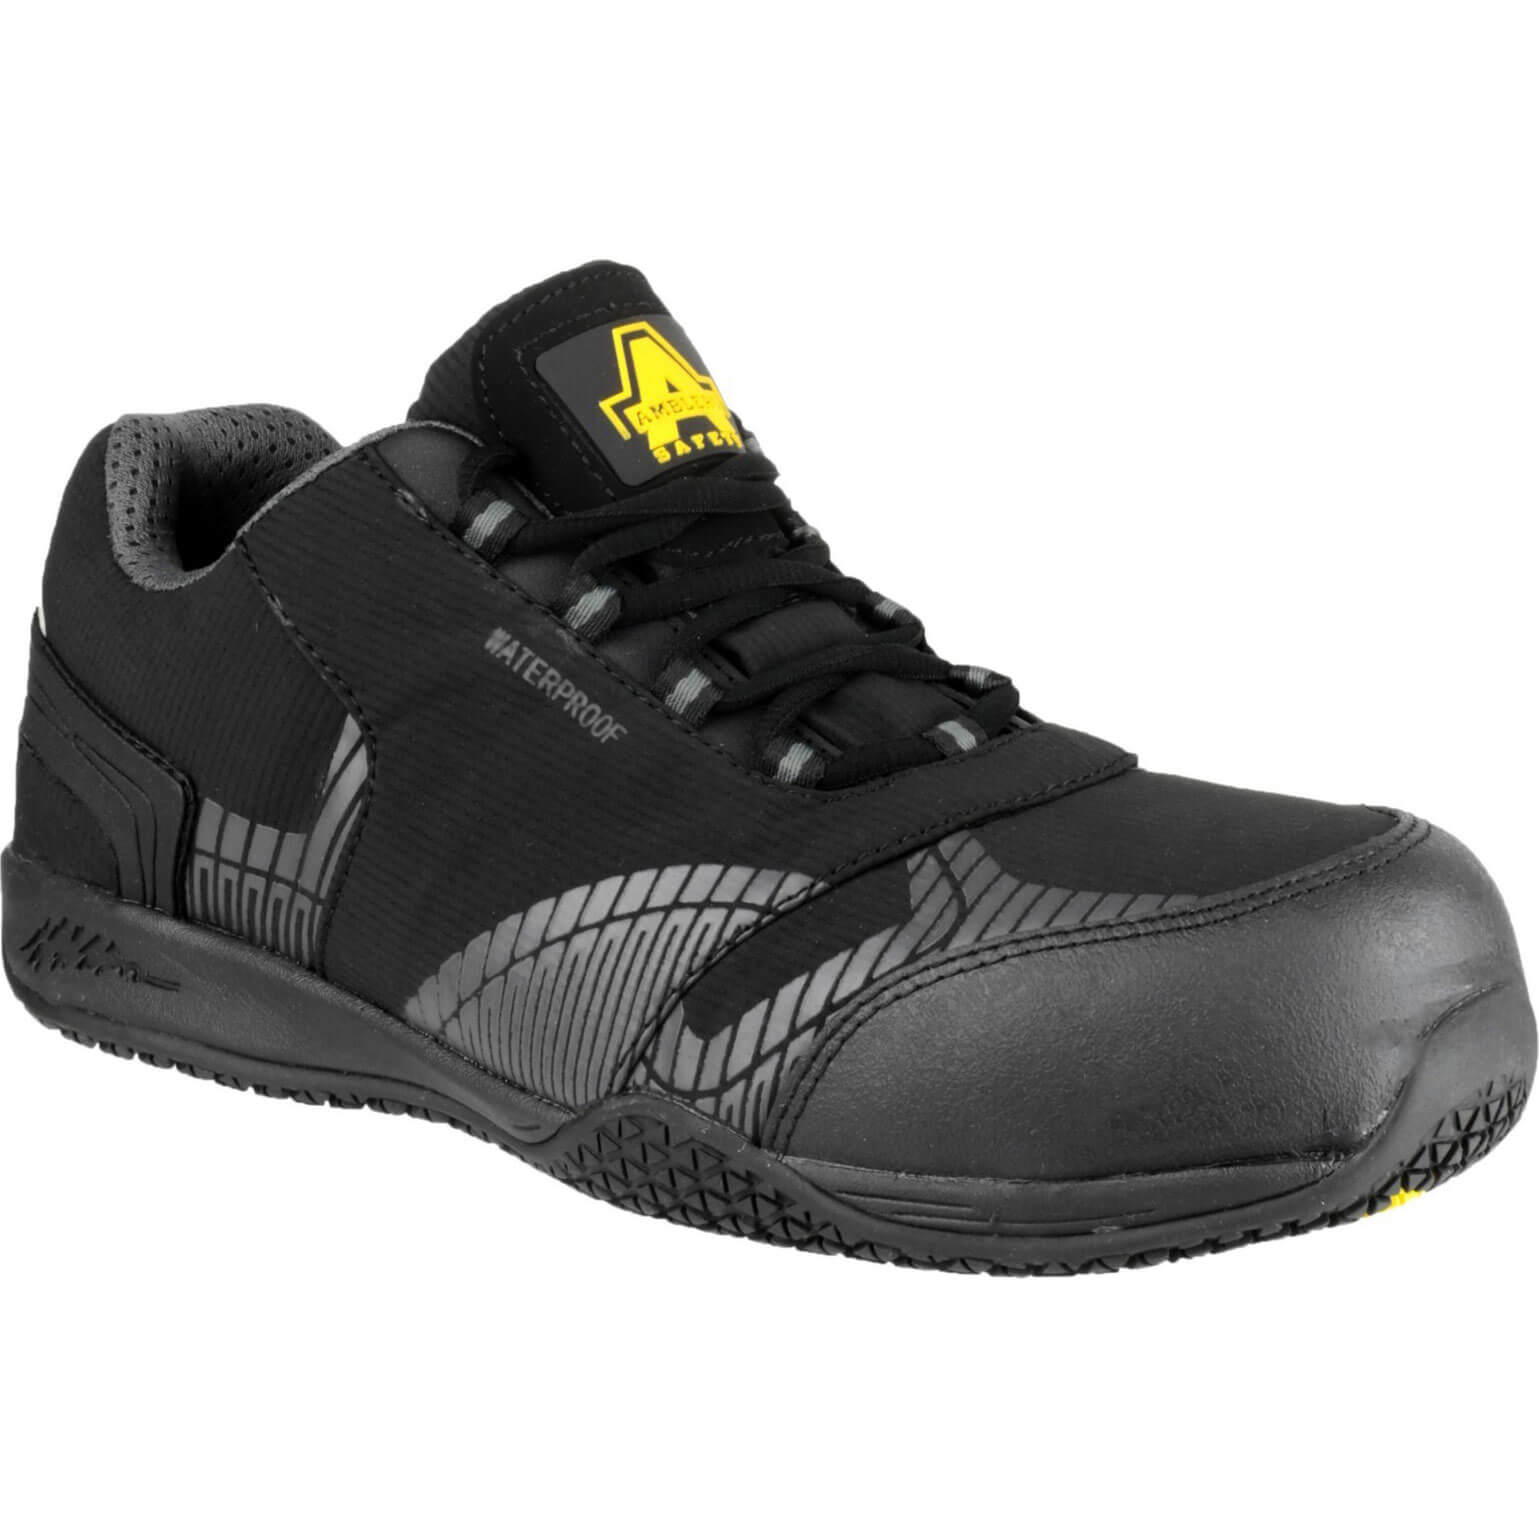 Photo of Amblers Safety Fs29c Waterproof Metal Free Non Leather Safety Trainer Black Size 10.5